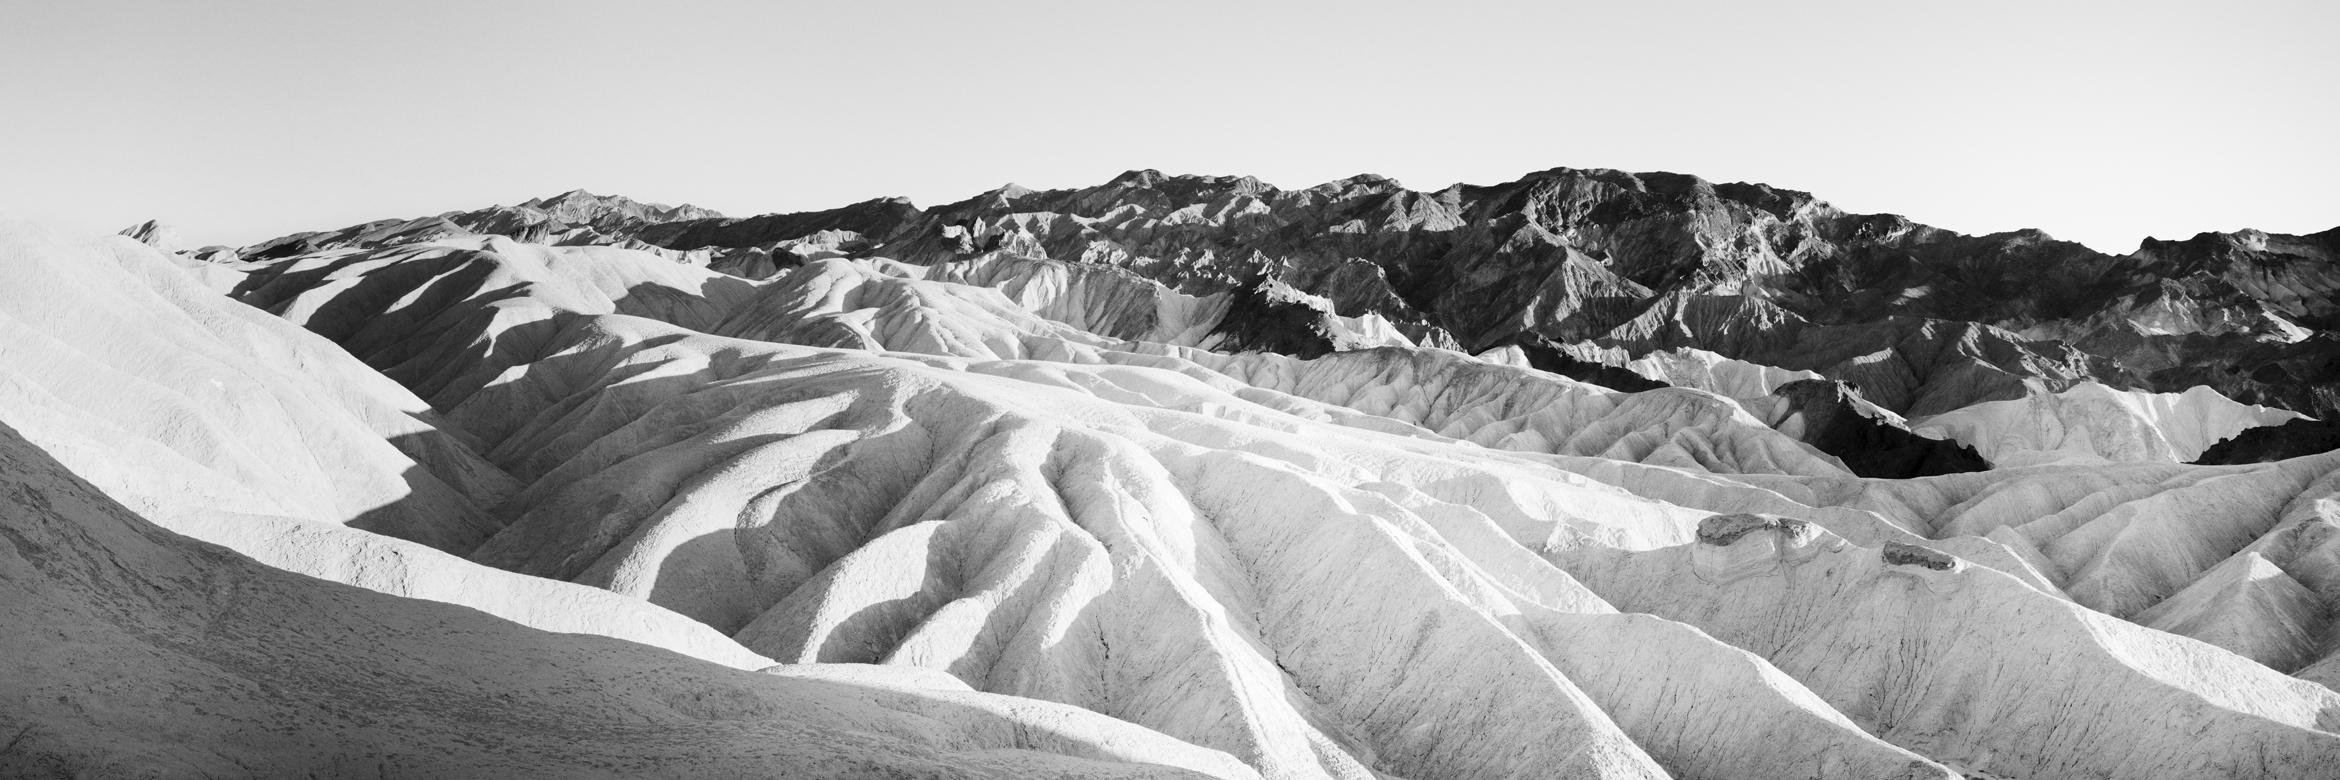 Shadow Mountains, Death Valley, USA, black and white photography, landscape